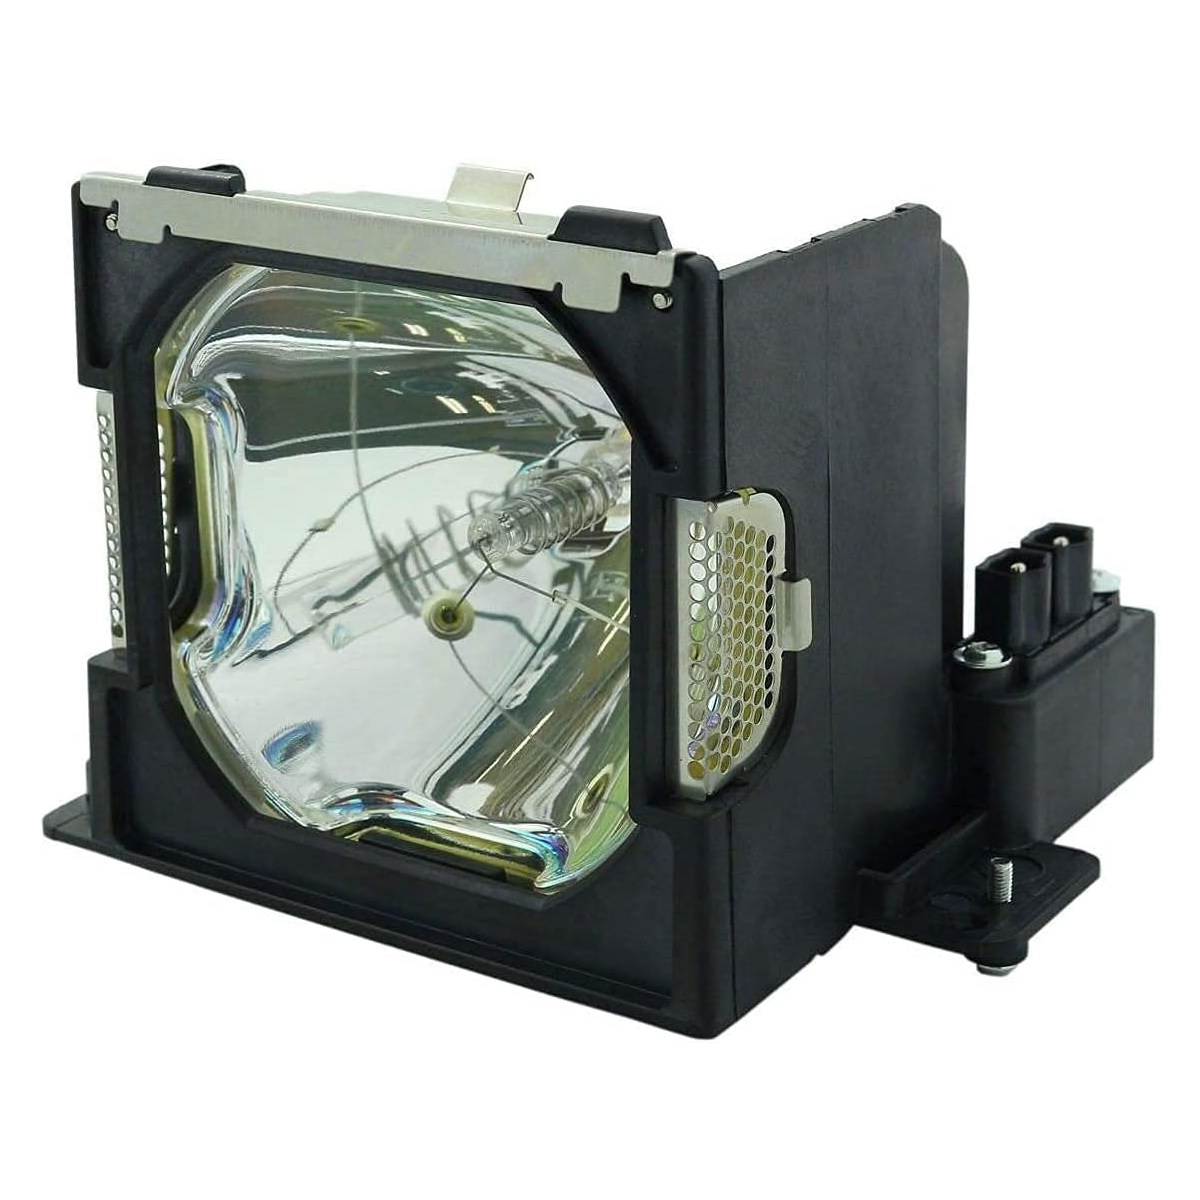 Replacement Projector lamp LV-LP13/7670A001AA For CANON LV-7545